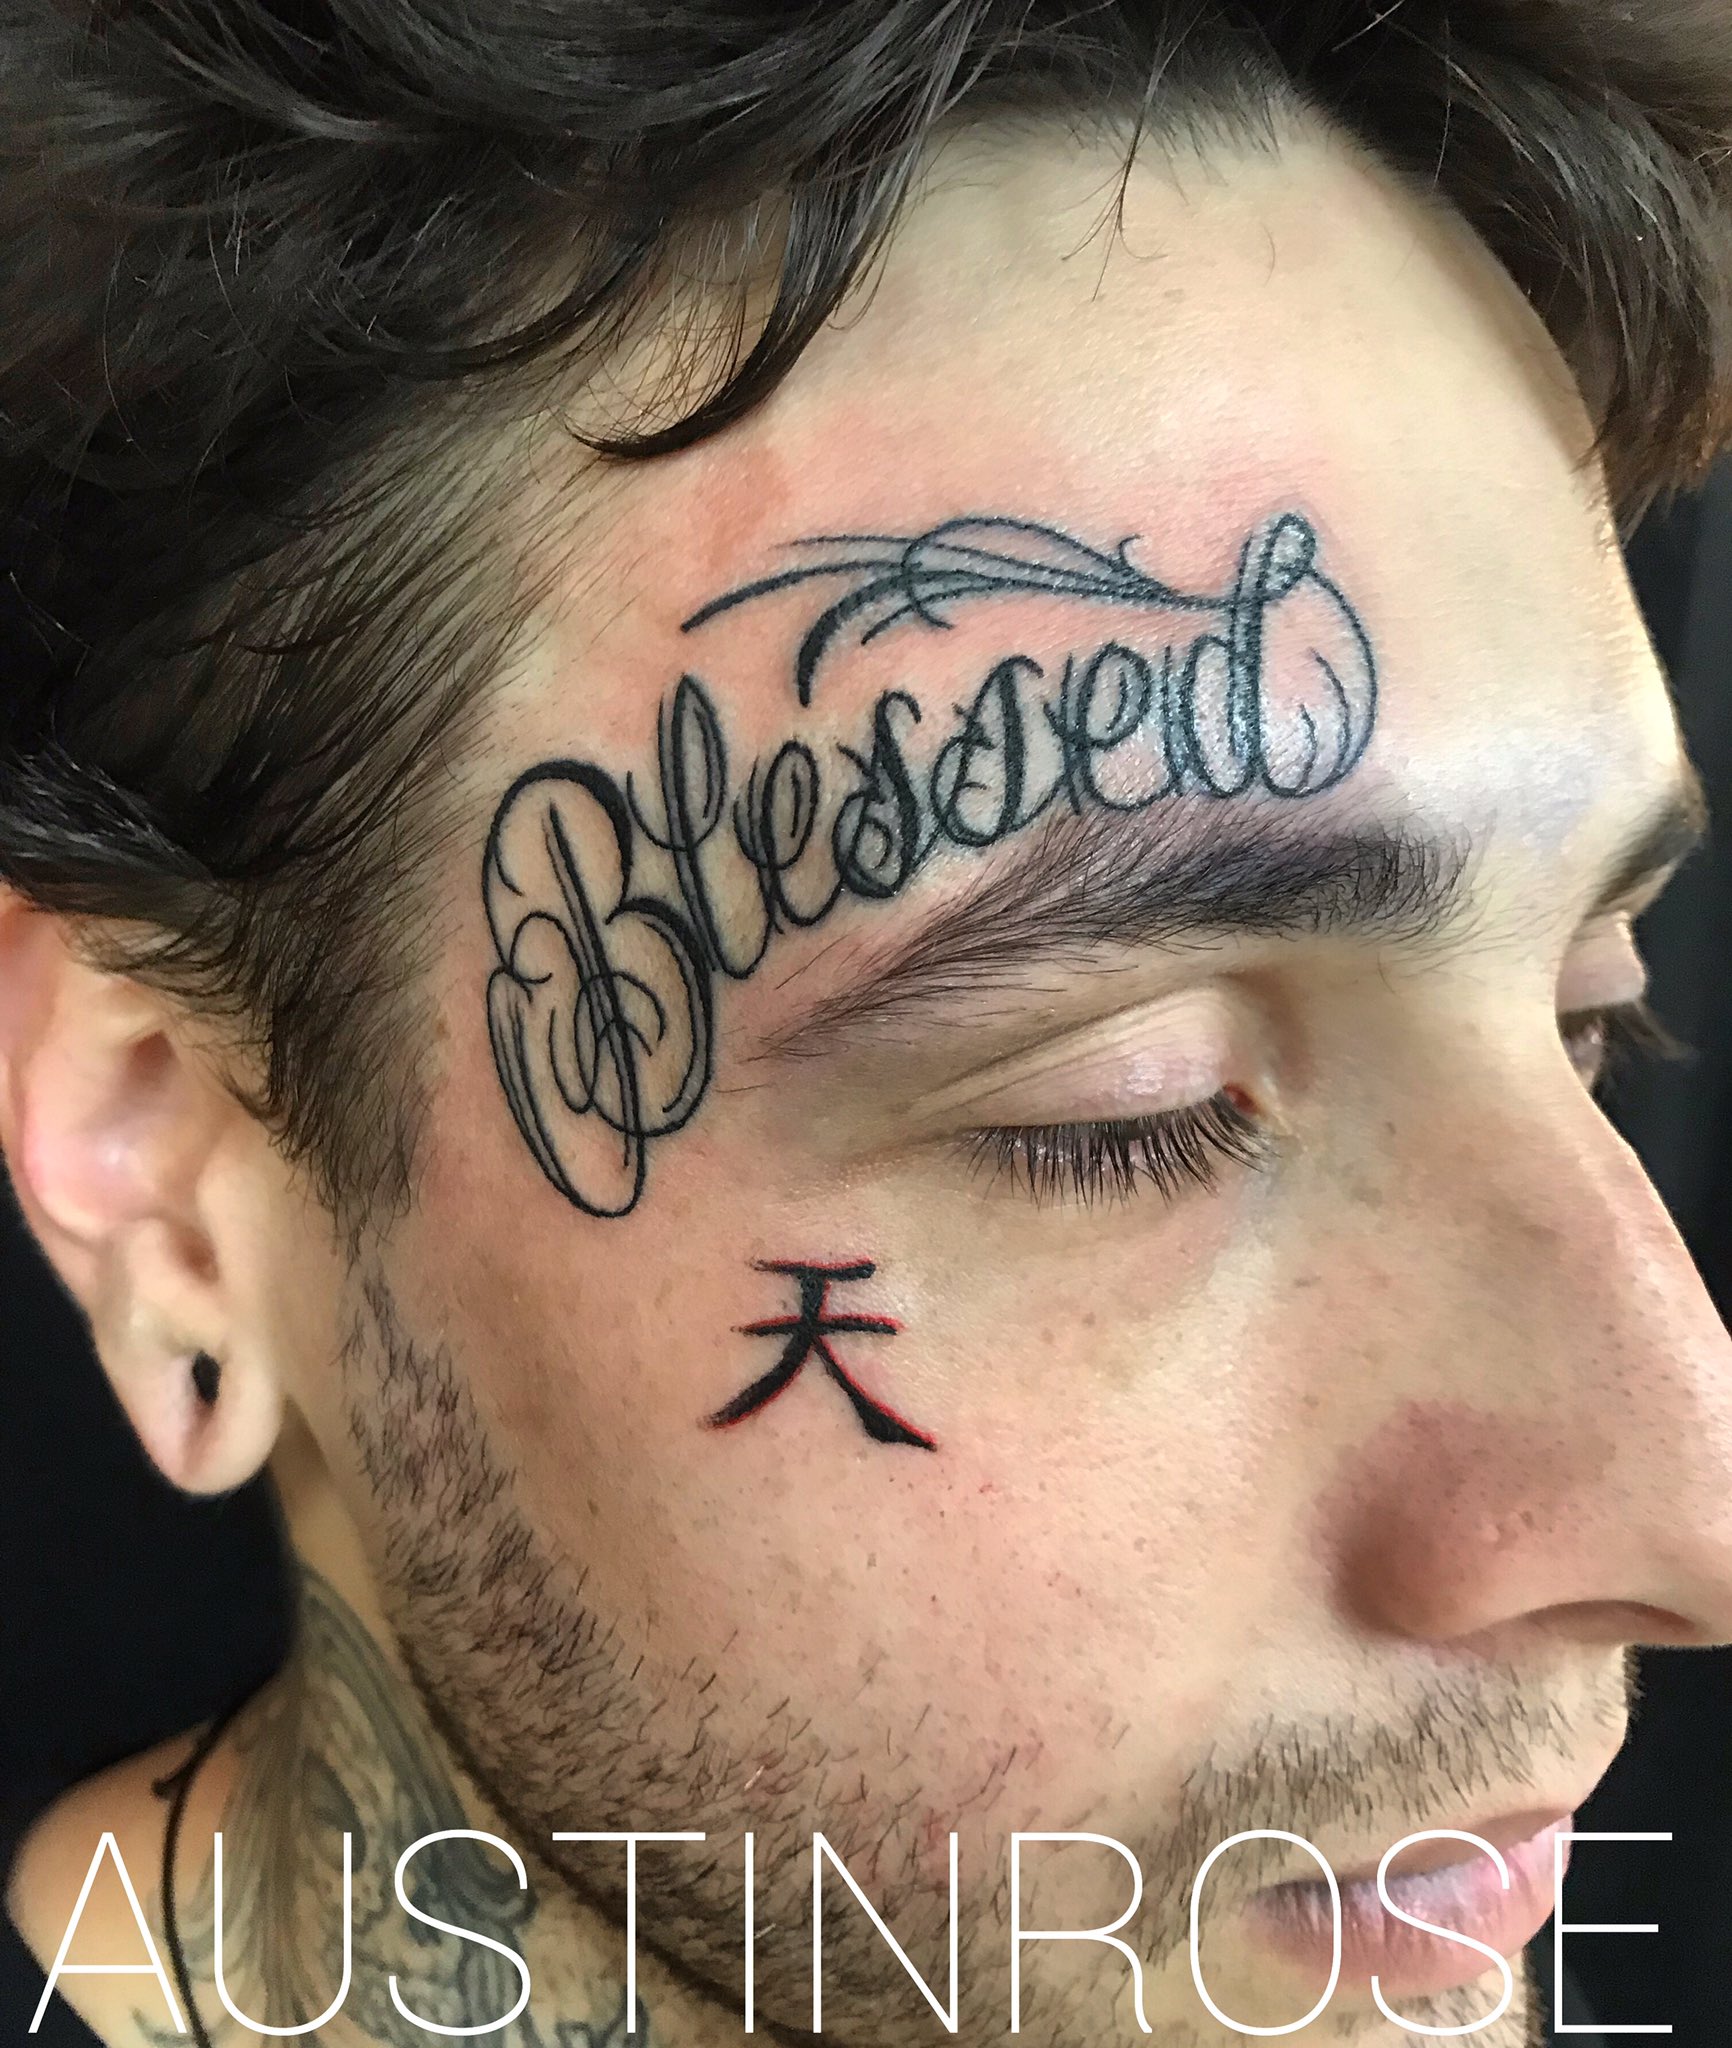 Blessed lettering tattoo on Travis Barkers face